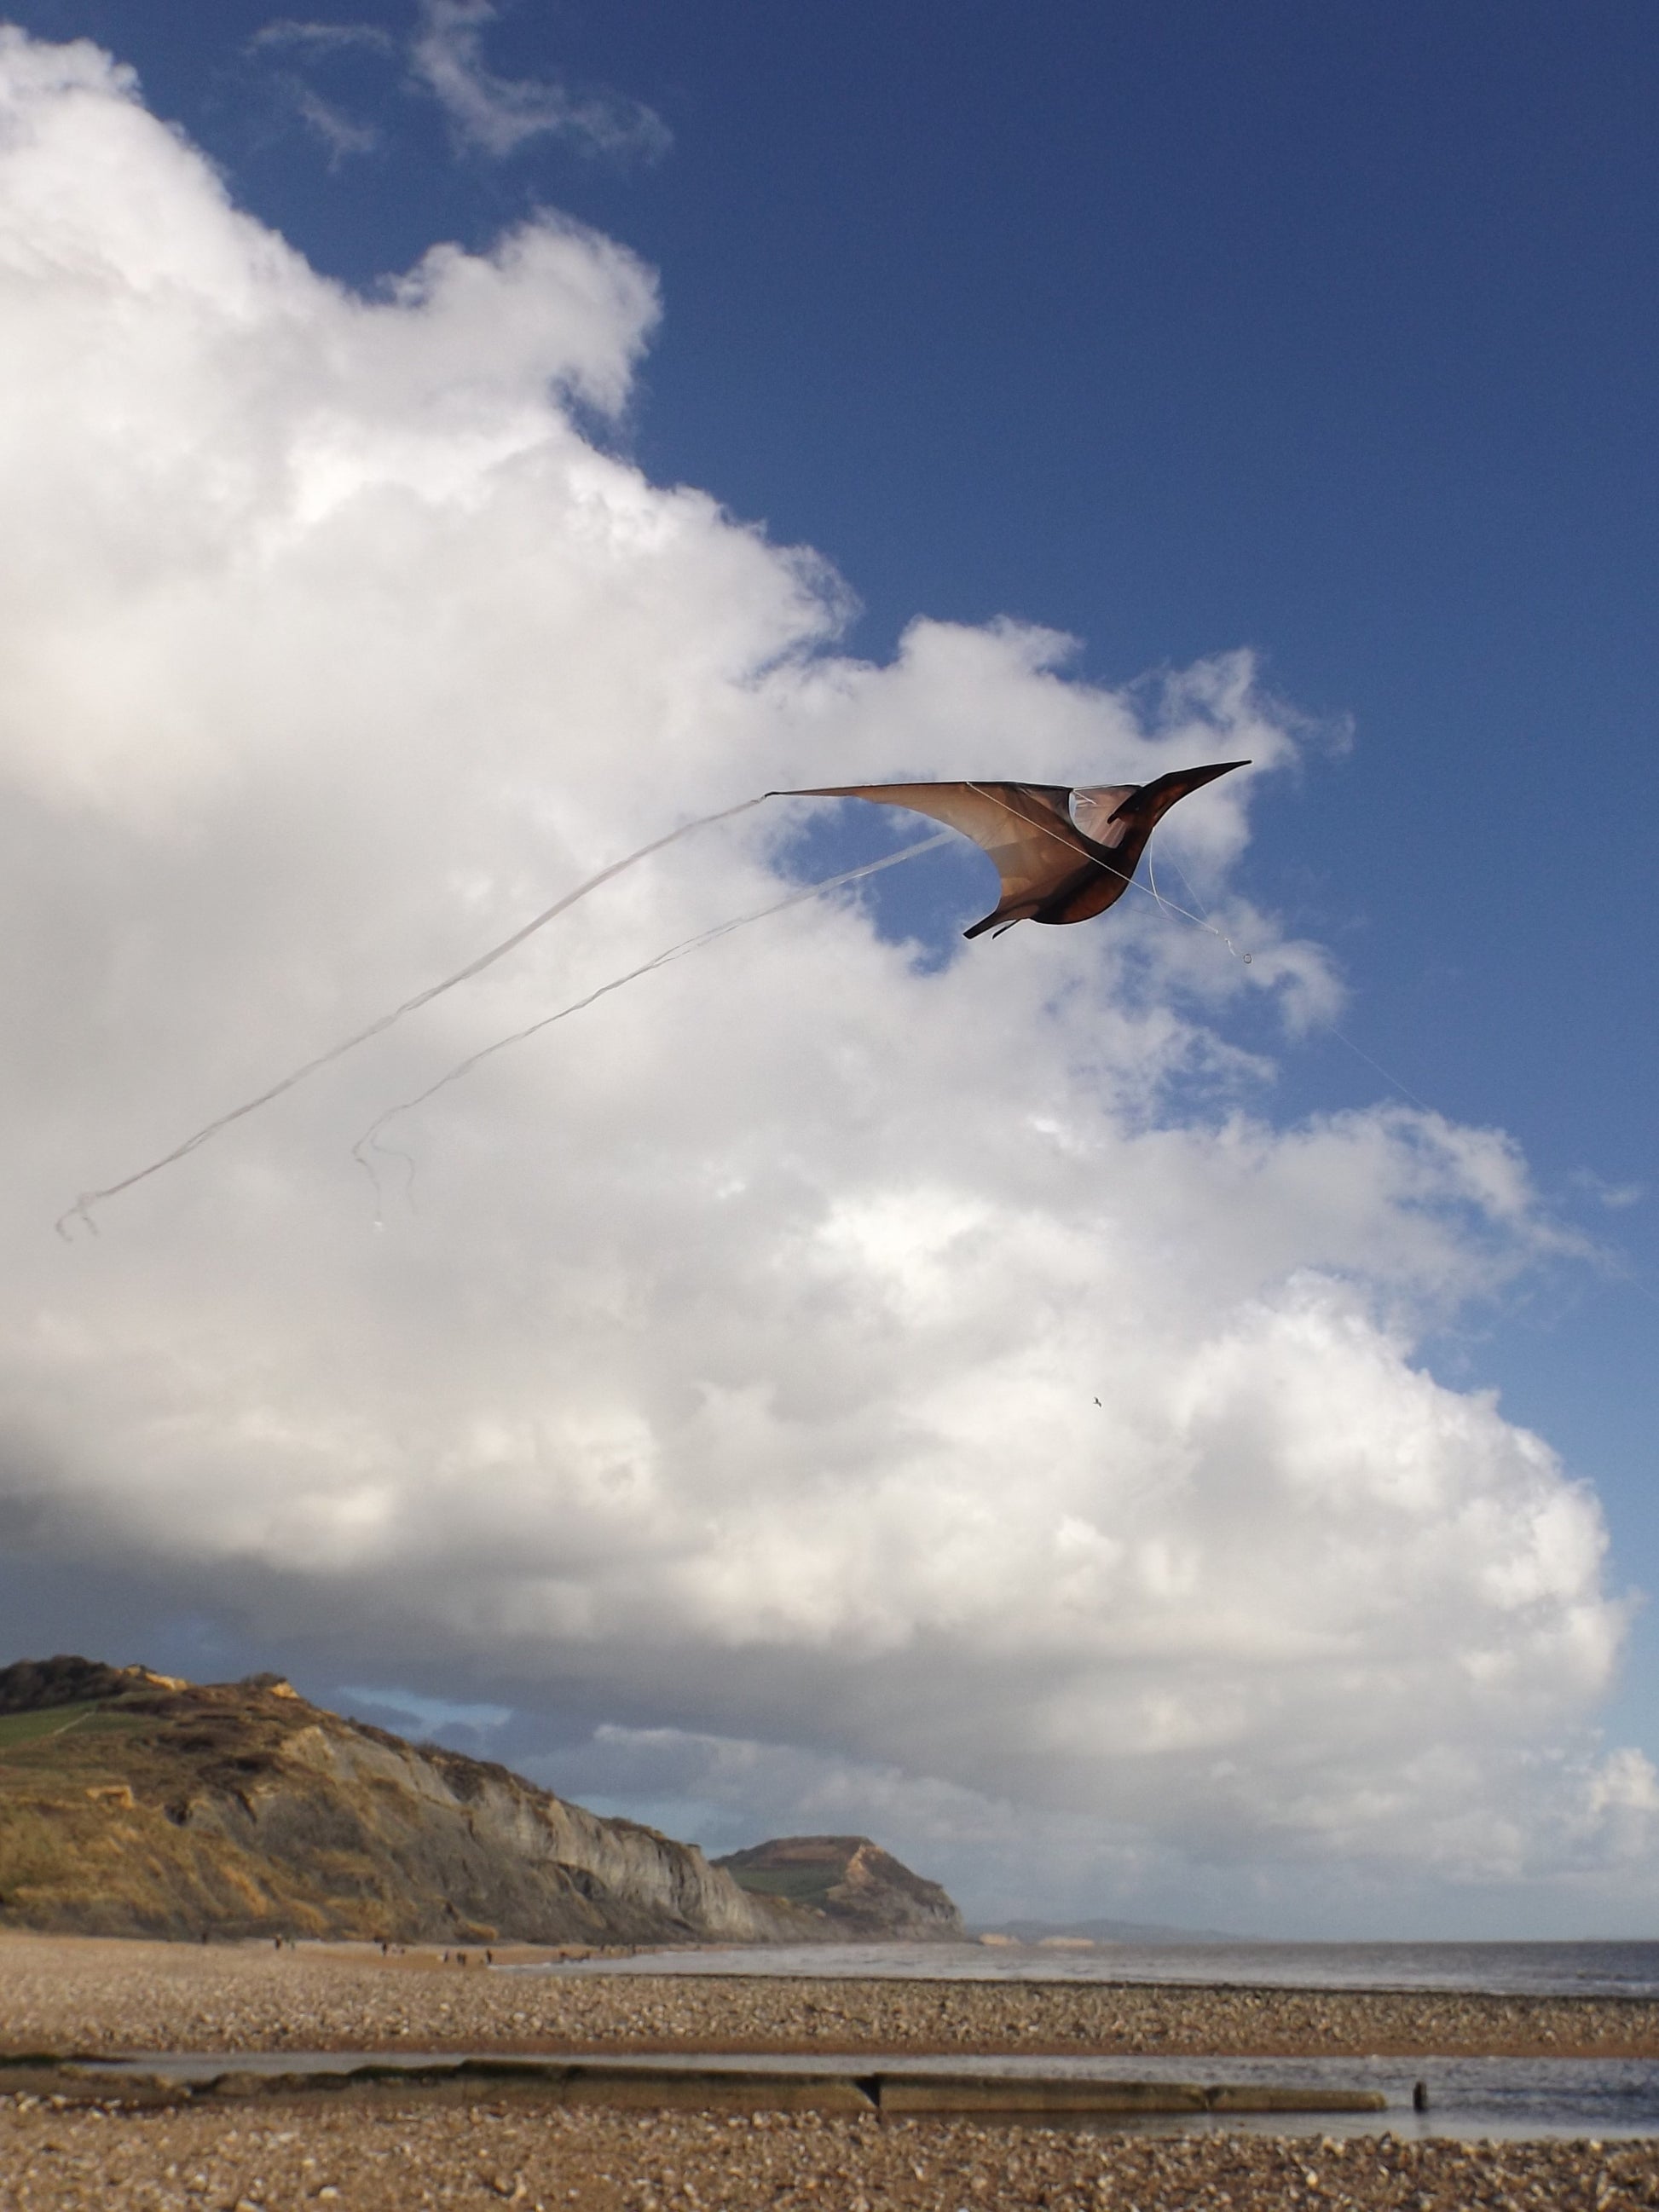 Pterodactyl kite flying over Charmouth beach